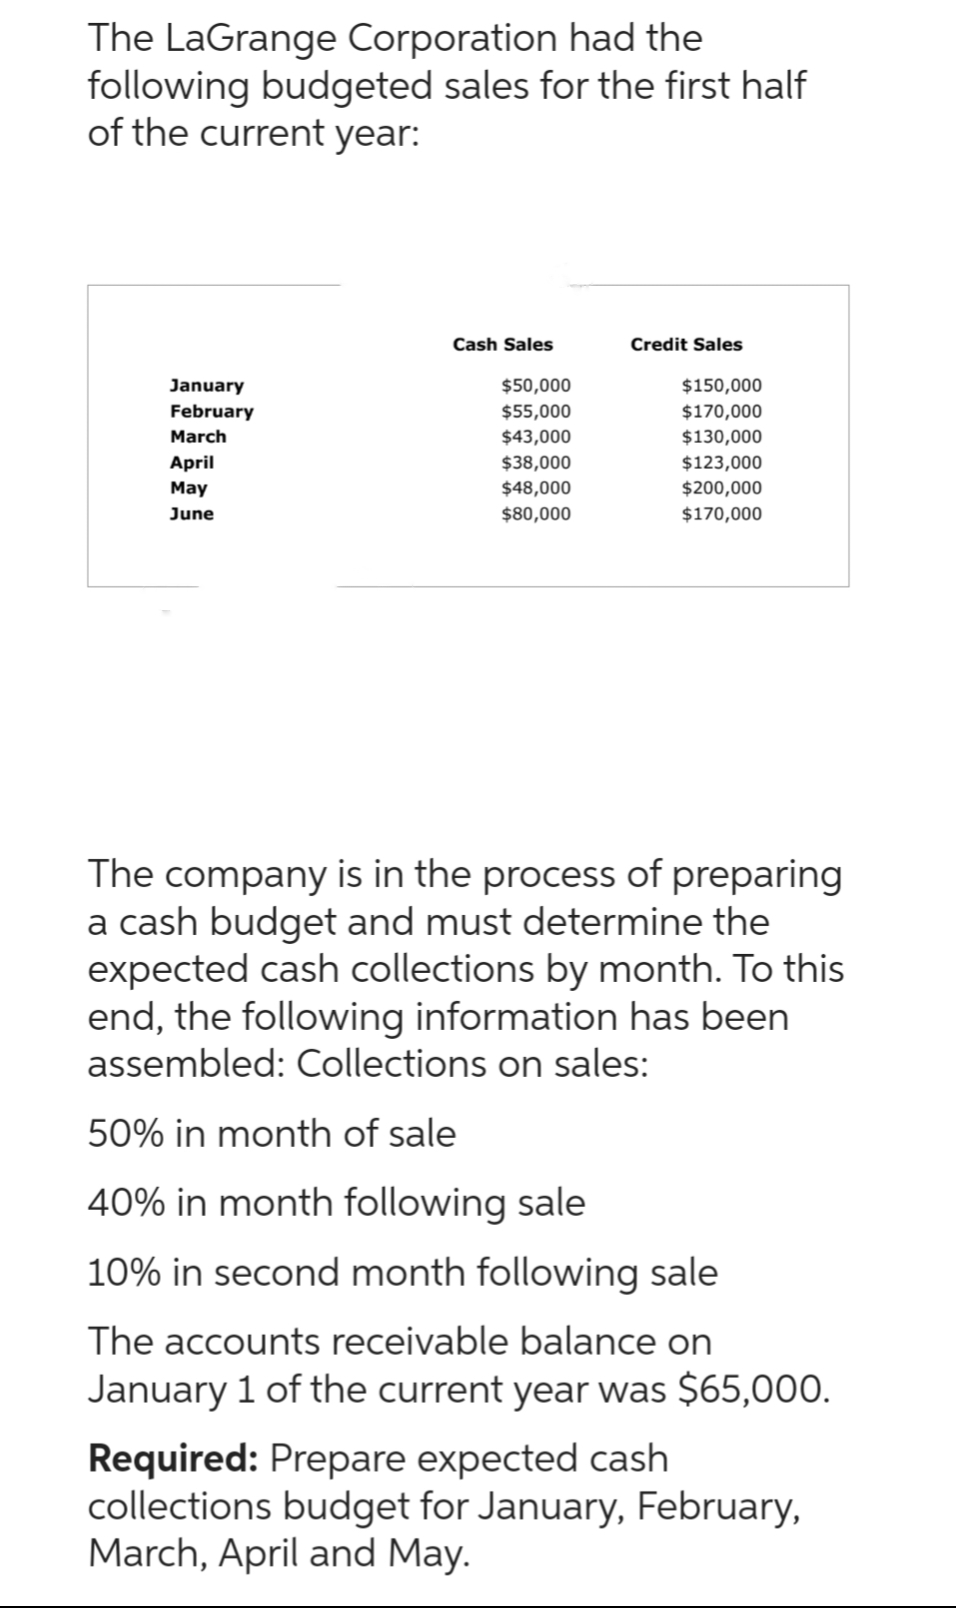 The LaGrange Corporation had the
following budgeted sales for the first half
of the current year:
January
February
March
April
May
June
Cash Sales
$50,000
$55,000
$43,000
$38,000
$48,000
$80,000
Credit Sales
$150,000
$170,000
$130,000
$123,000
$200,000
$170,000
The company is in the process of preparing
a cash budget and must determine the
expected cash collections by month. To this
end, the following information has been
assembled: Collections on sales:
50% in month of sale
40% in month following sale
10% in second month following sale
The accounts receivable balance on
January 1 of the current year was $65,000.
Required: Prepare expected cash.
collections budget for January, February,
March, April and May.